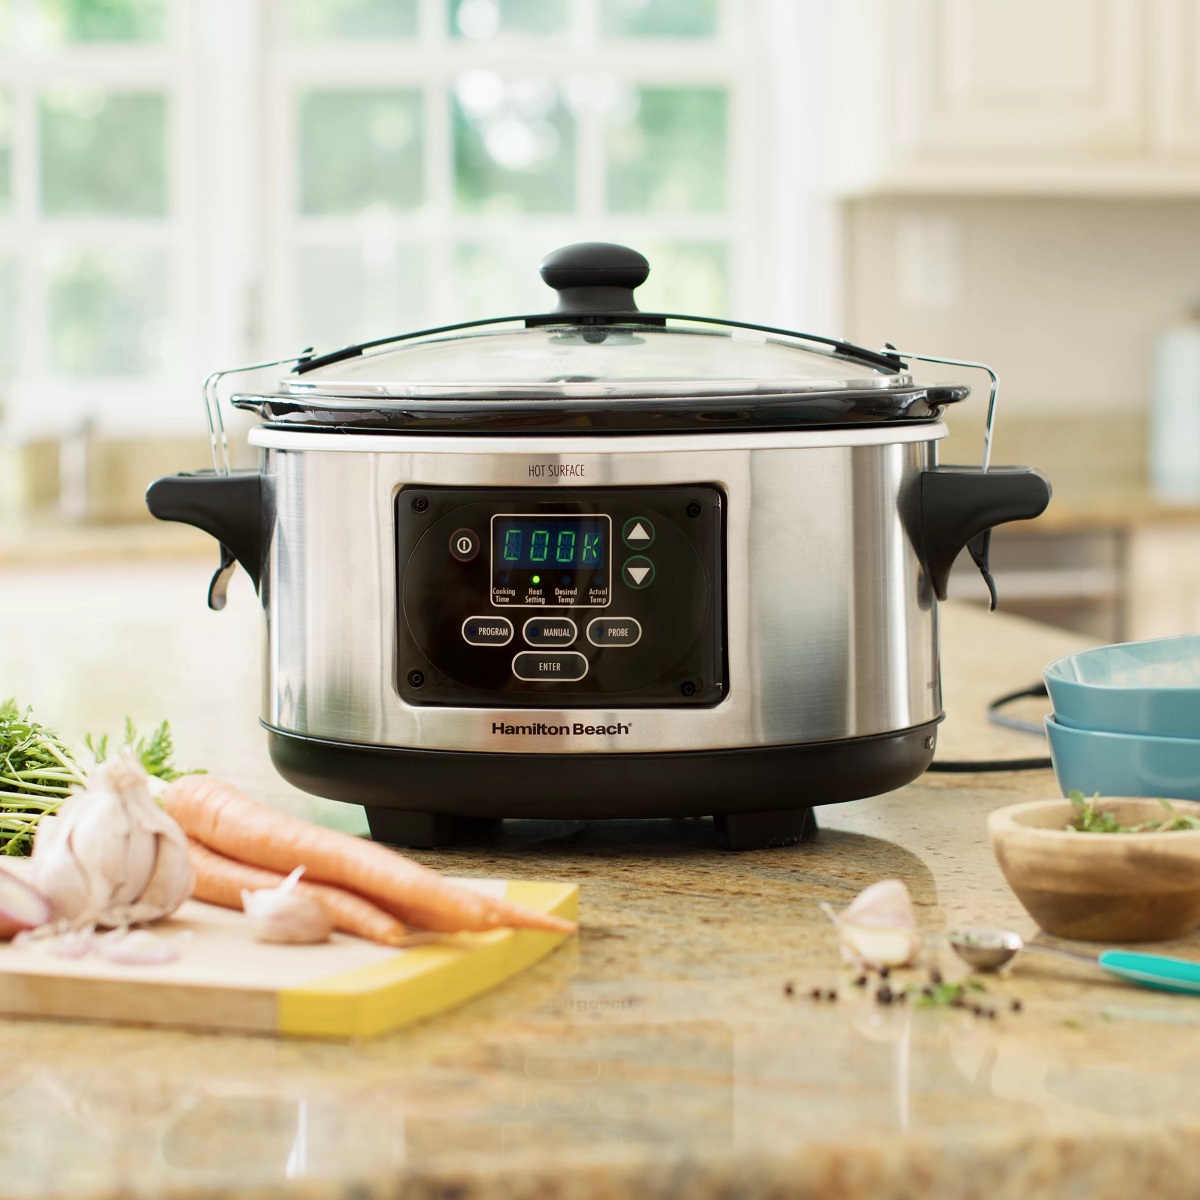 When Was The Slow Cooker Invented